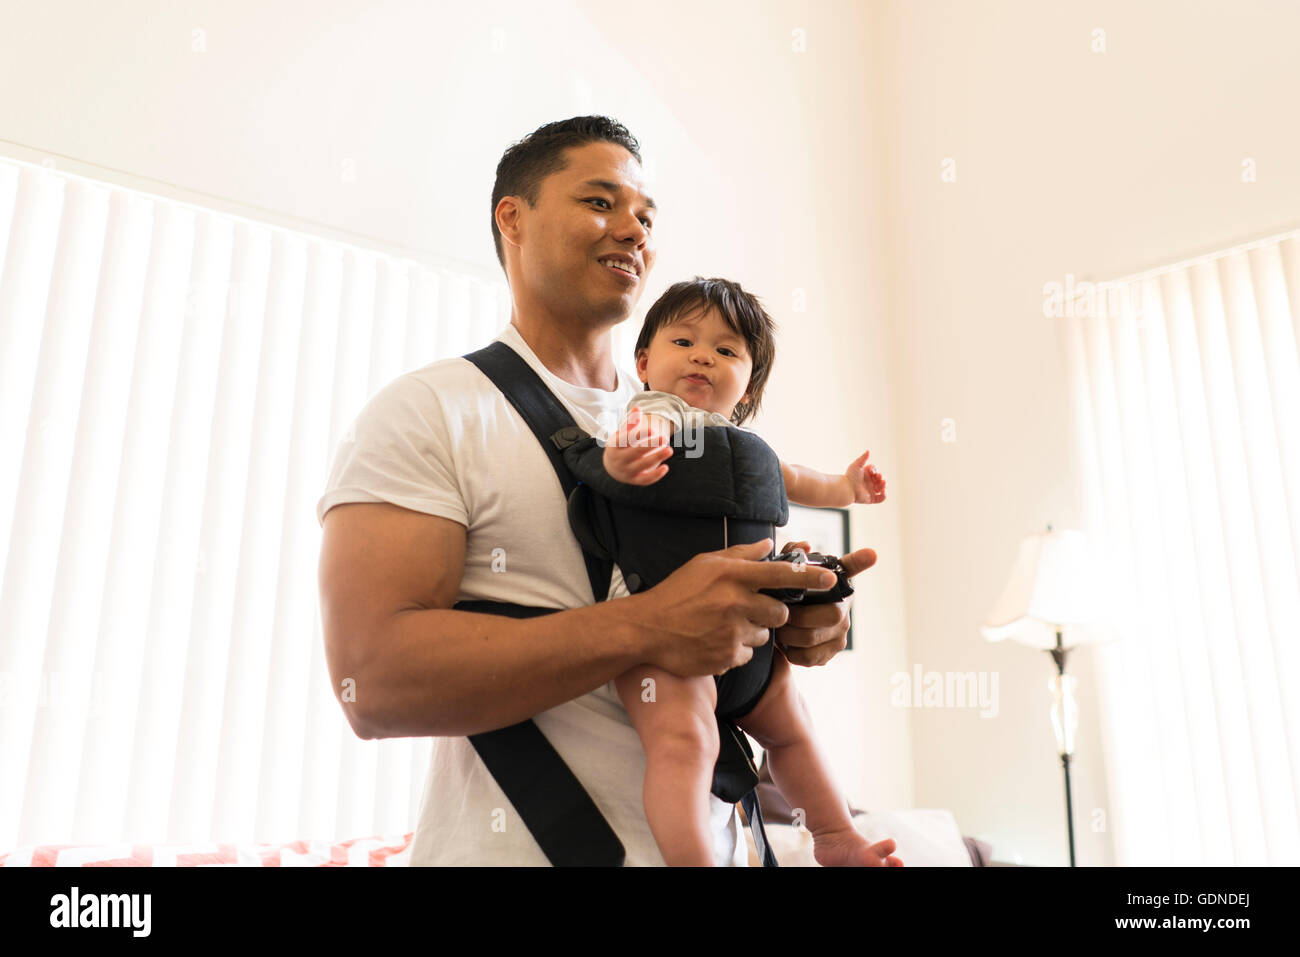 Father with baby in carrier, playing video game Stock Photo